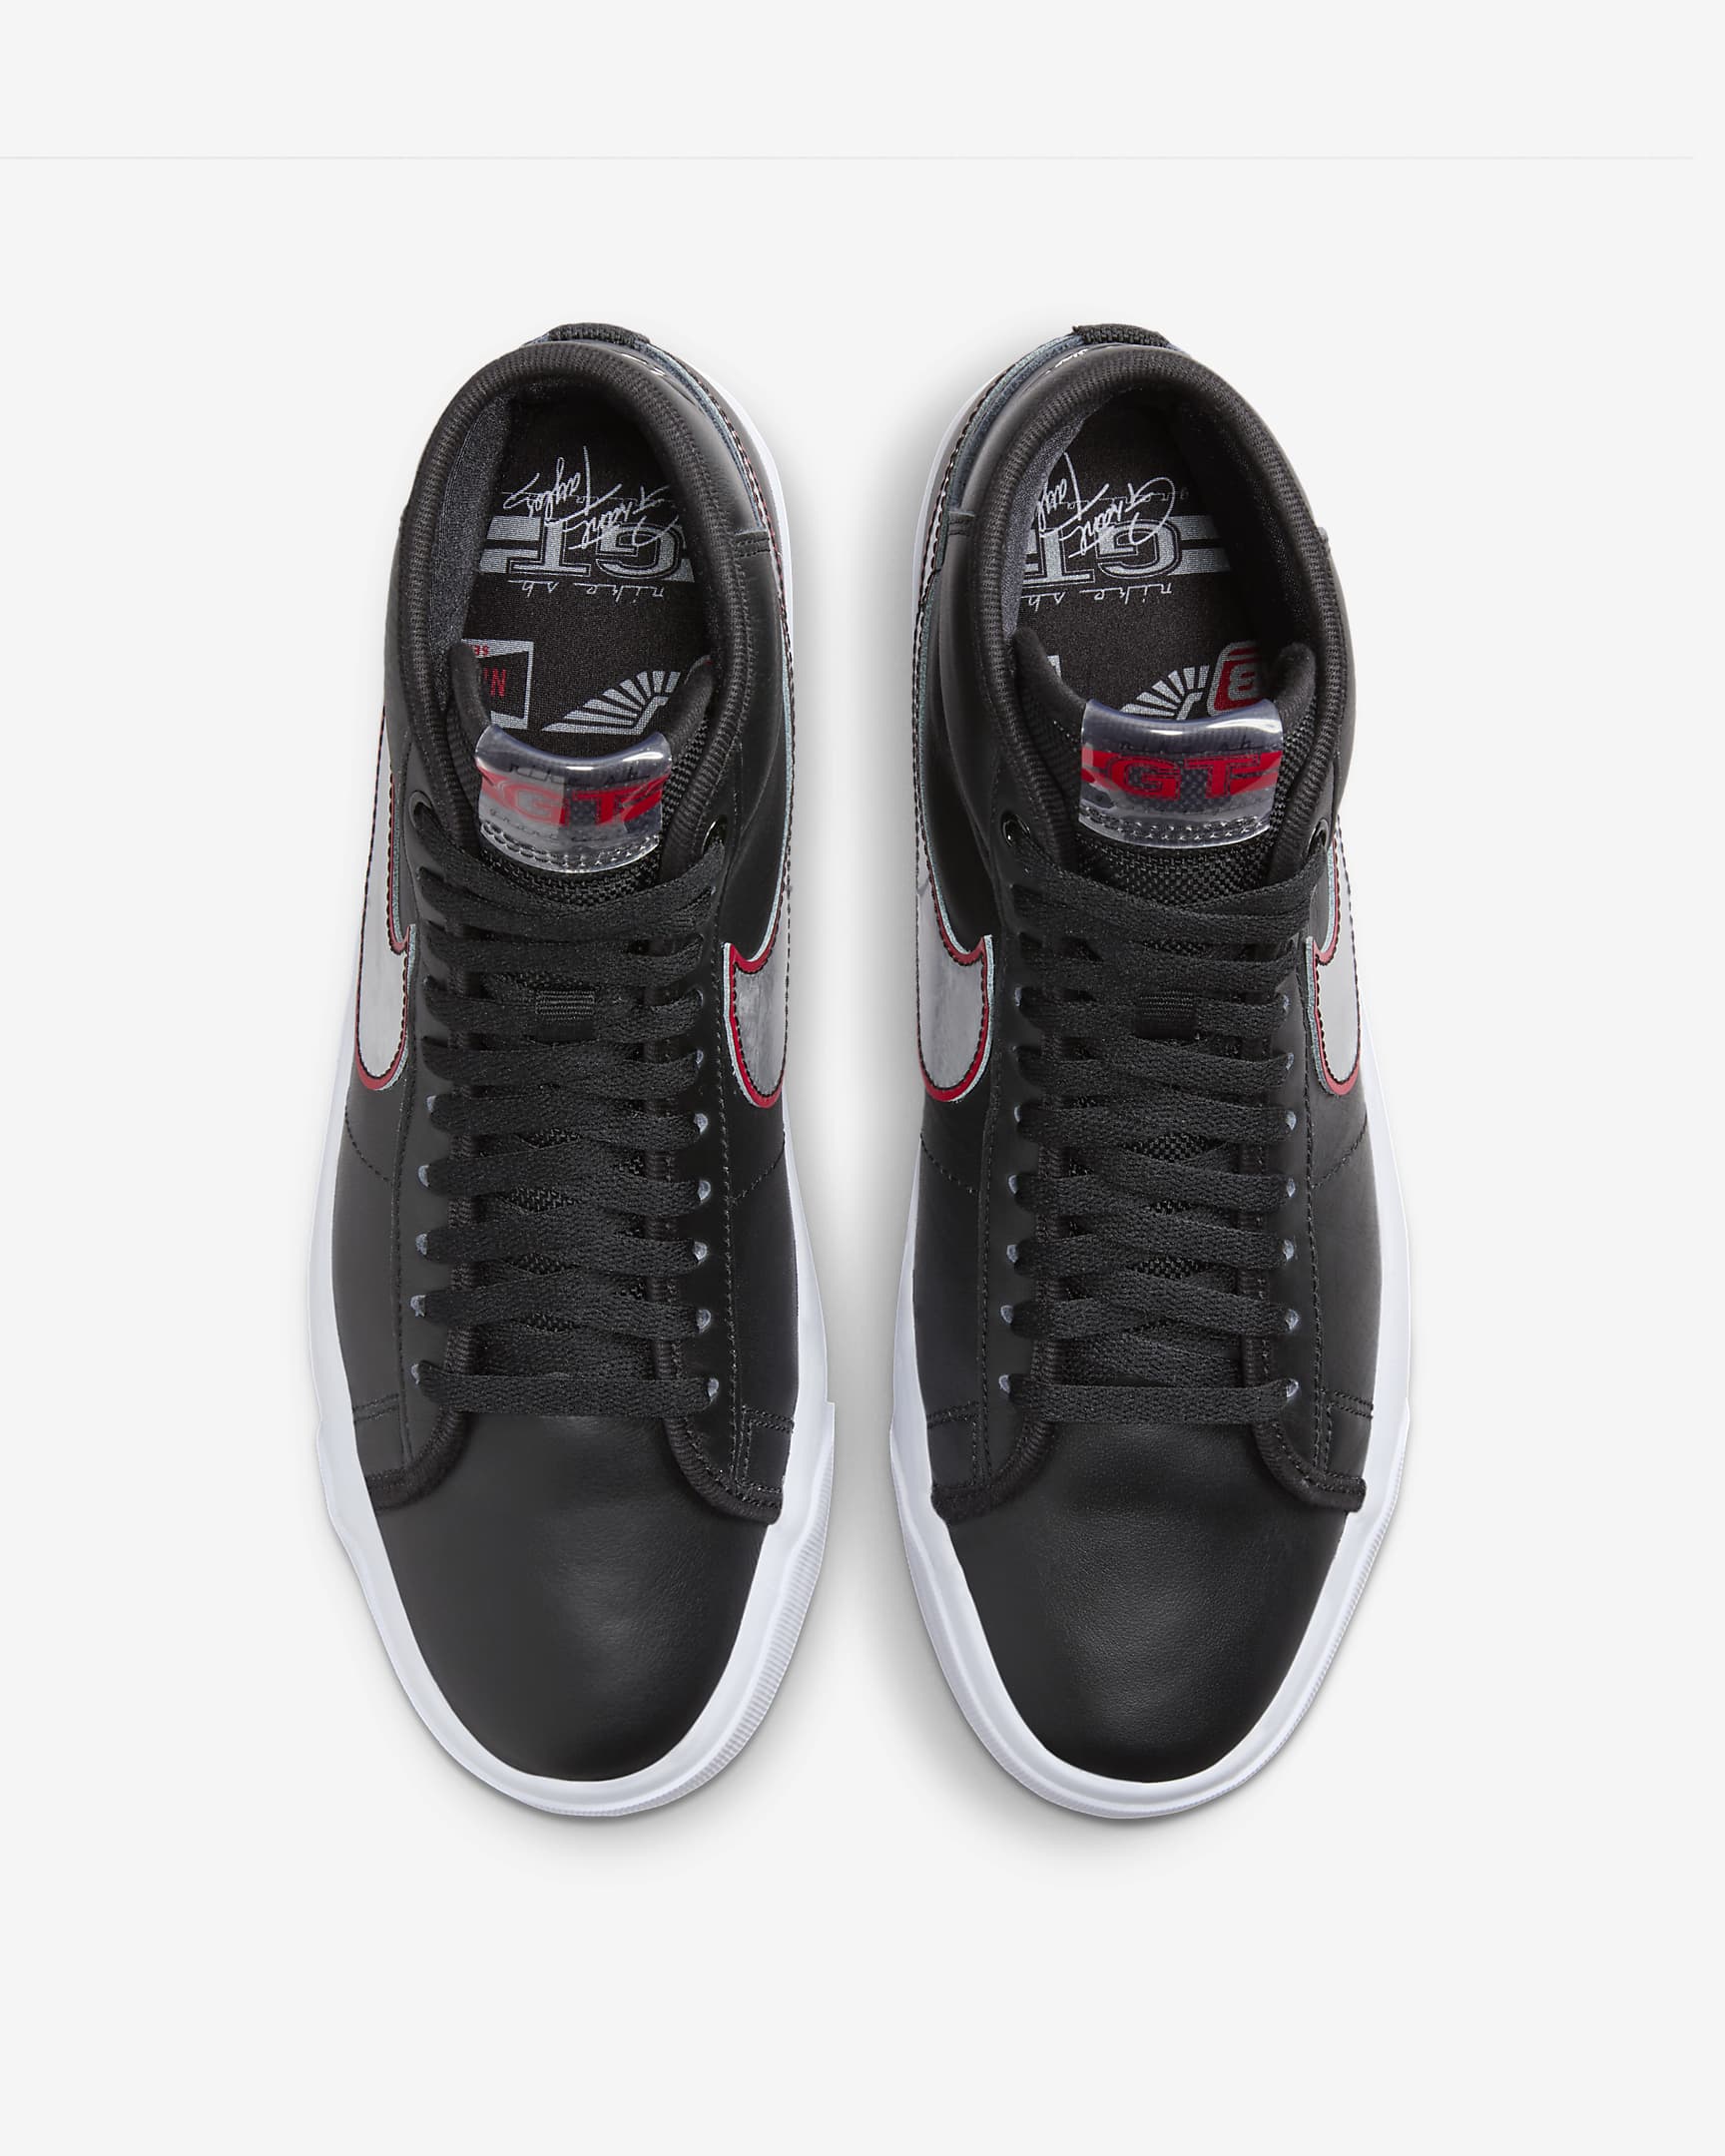 Skate in Style: Nike Zoom Blazer Mid Pro GT Skate Shoes Review – The Coolest Kicks on the Block?